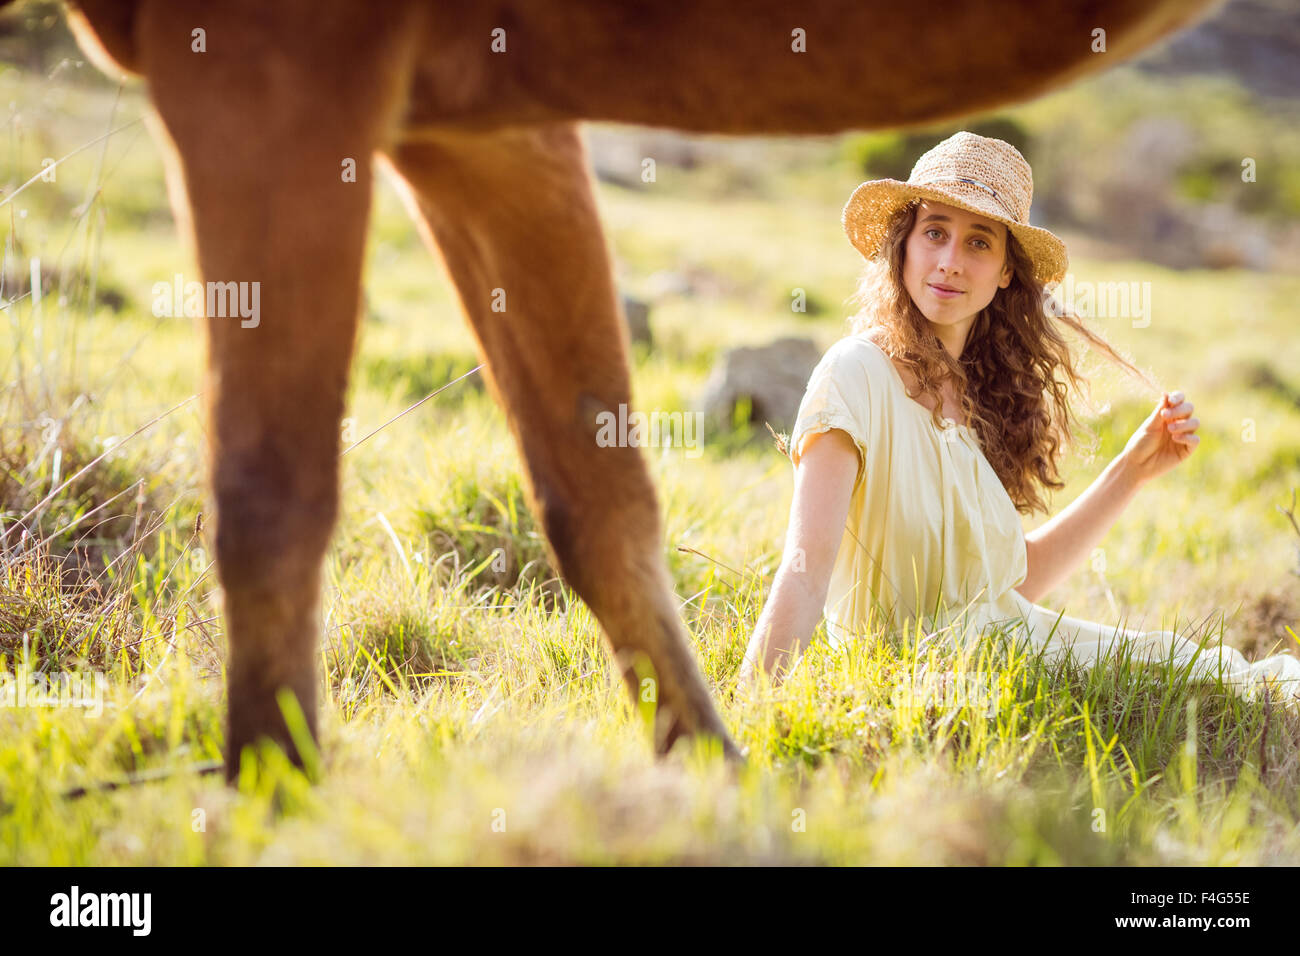 Young calm woman with her horse Stock Photo